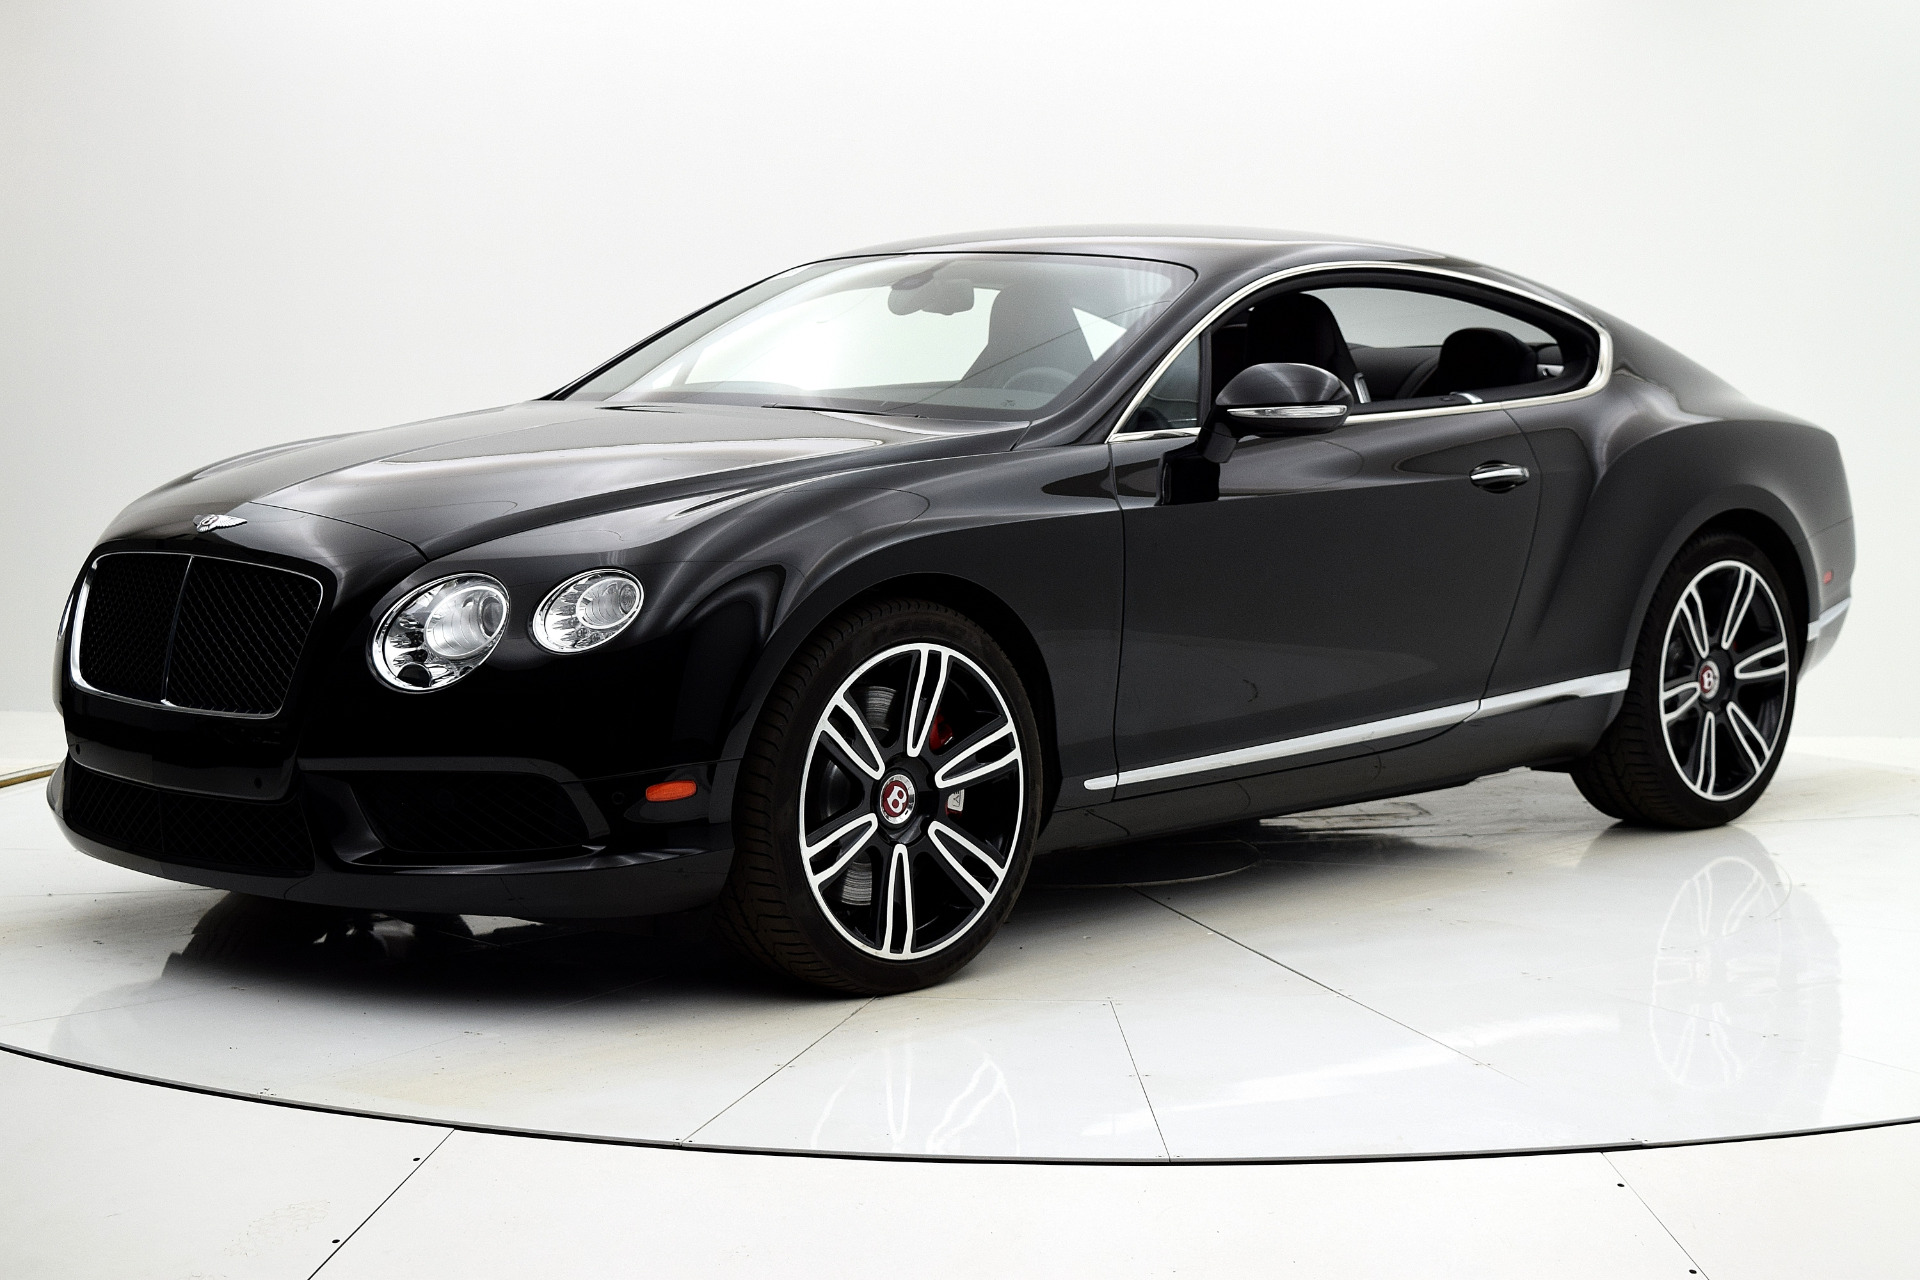 Used 14 Bentley Continental Gt V8 Coupe For Sale 139 0 Bentley Palmyra N J Stock 1496ji